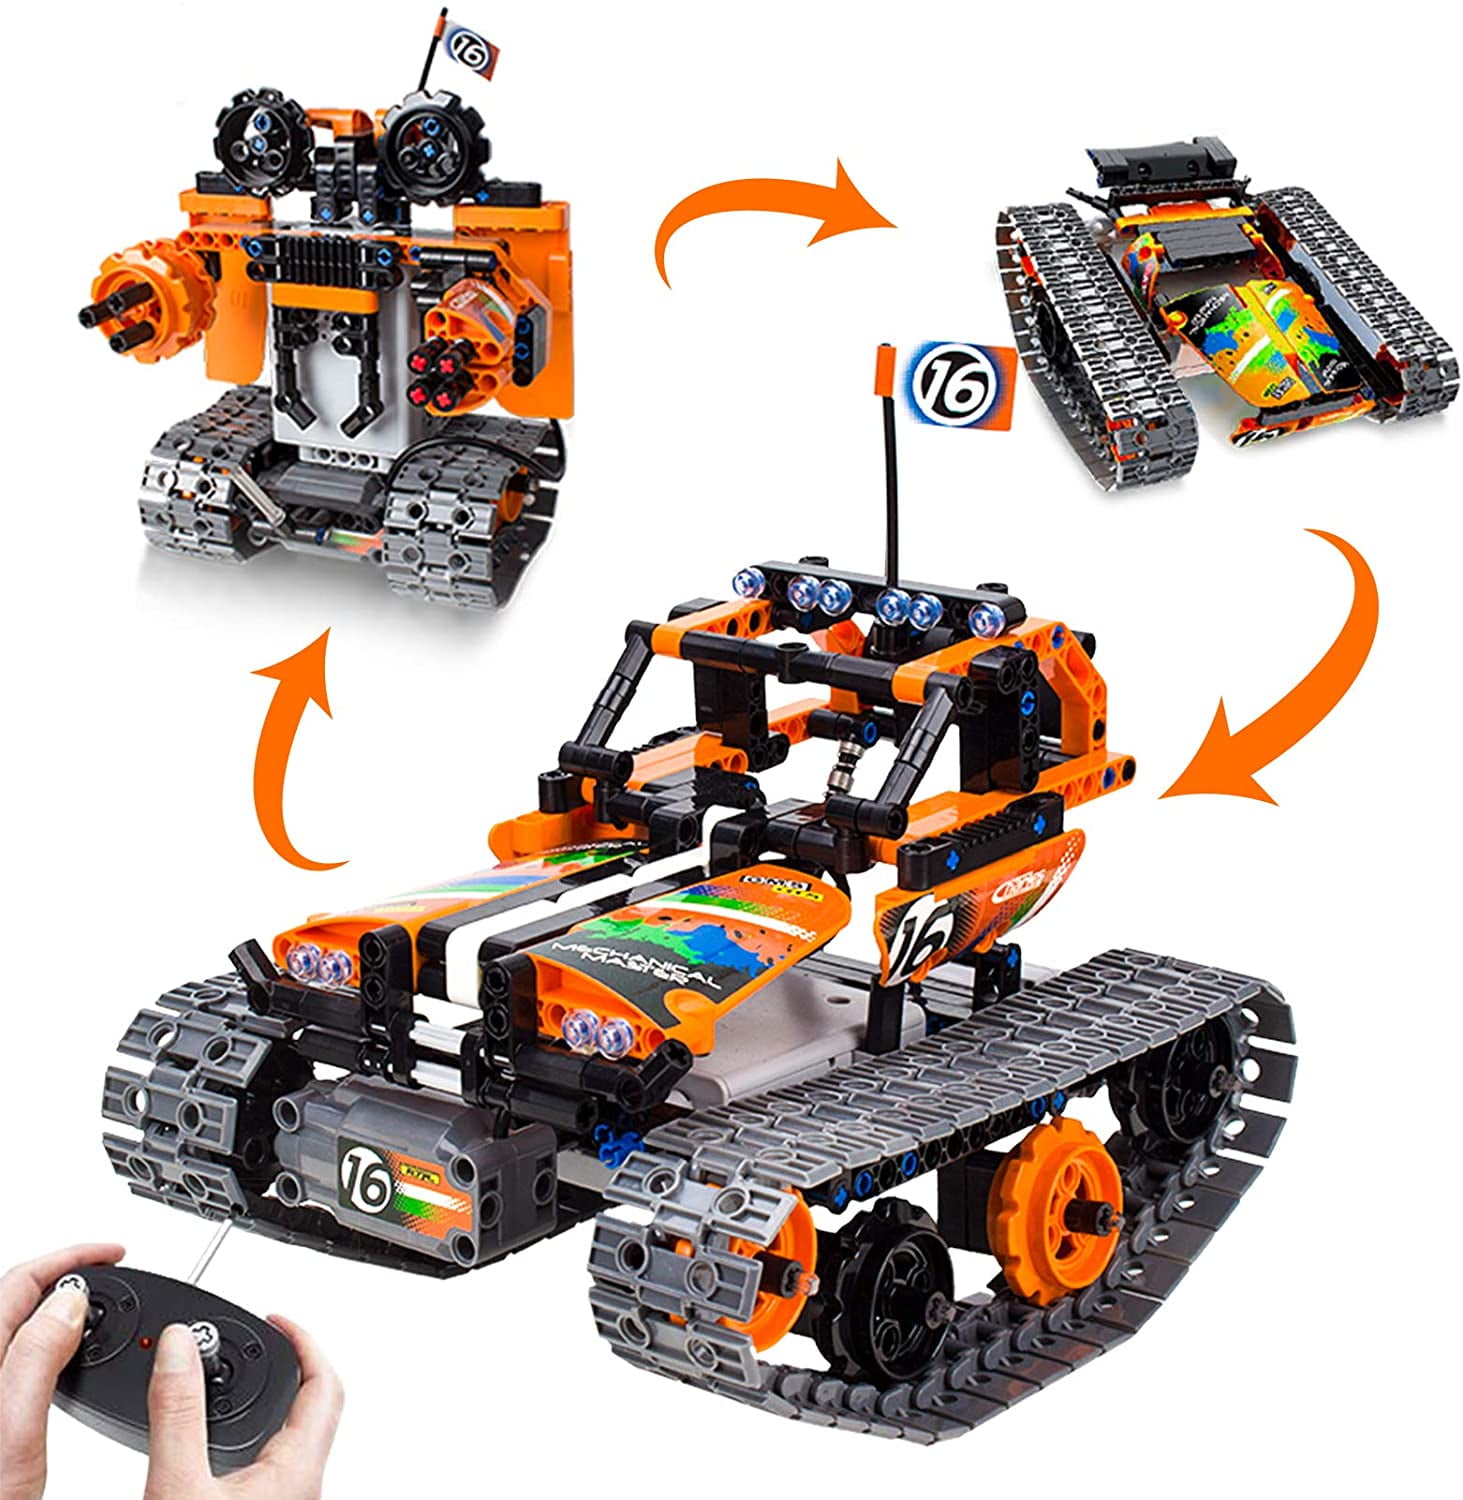 VANLINNY Robot Arm Kit and Remote Control Excavator,3 in 1 Science Kits with 4-DOF Robotic Car,Electronic Programming Toy for Kids Age 8+,Promotes STEM Interest in Science,Birthday Gifts for Boy/Girl. 